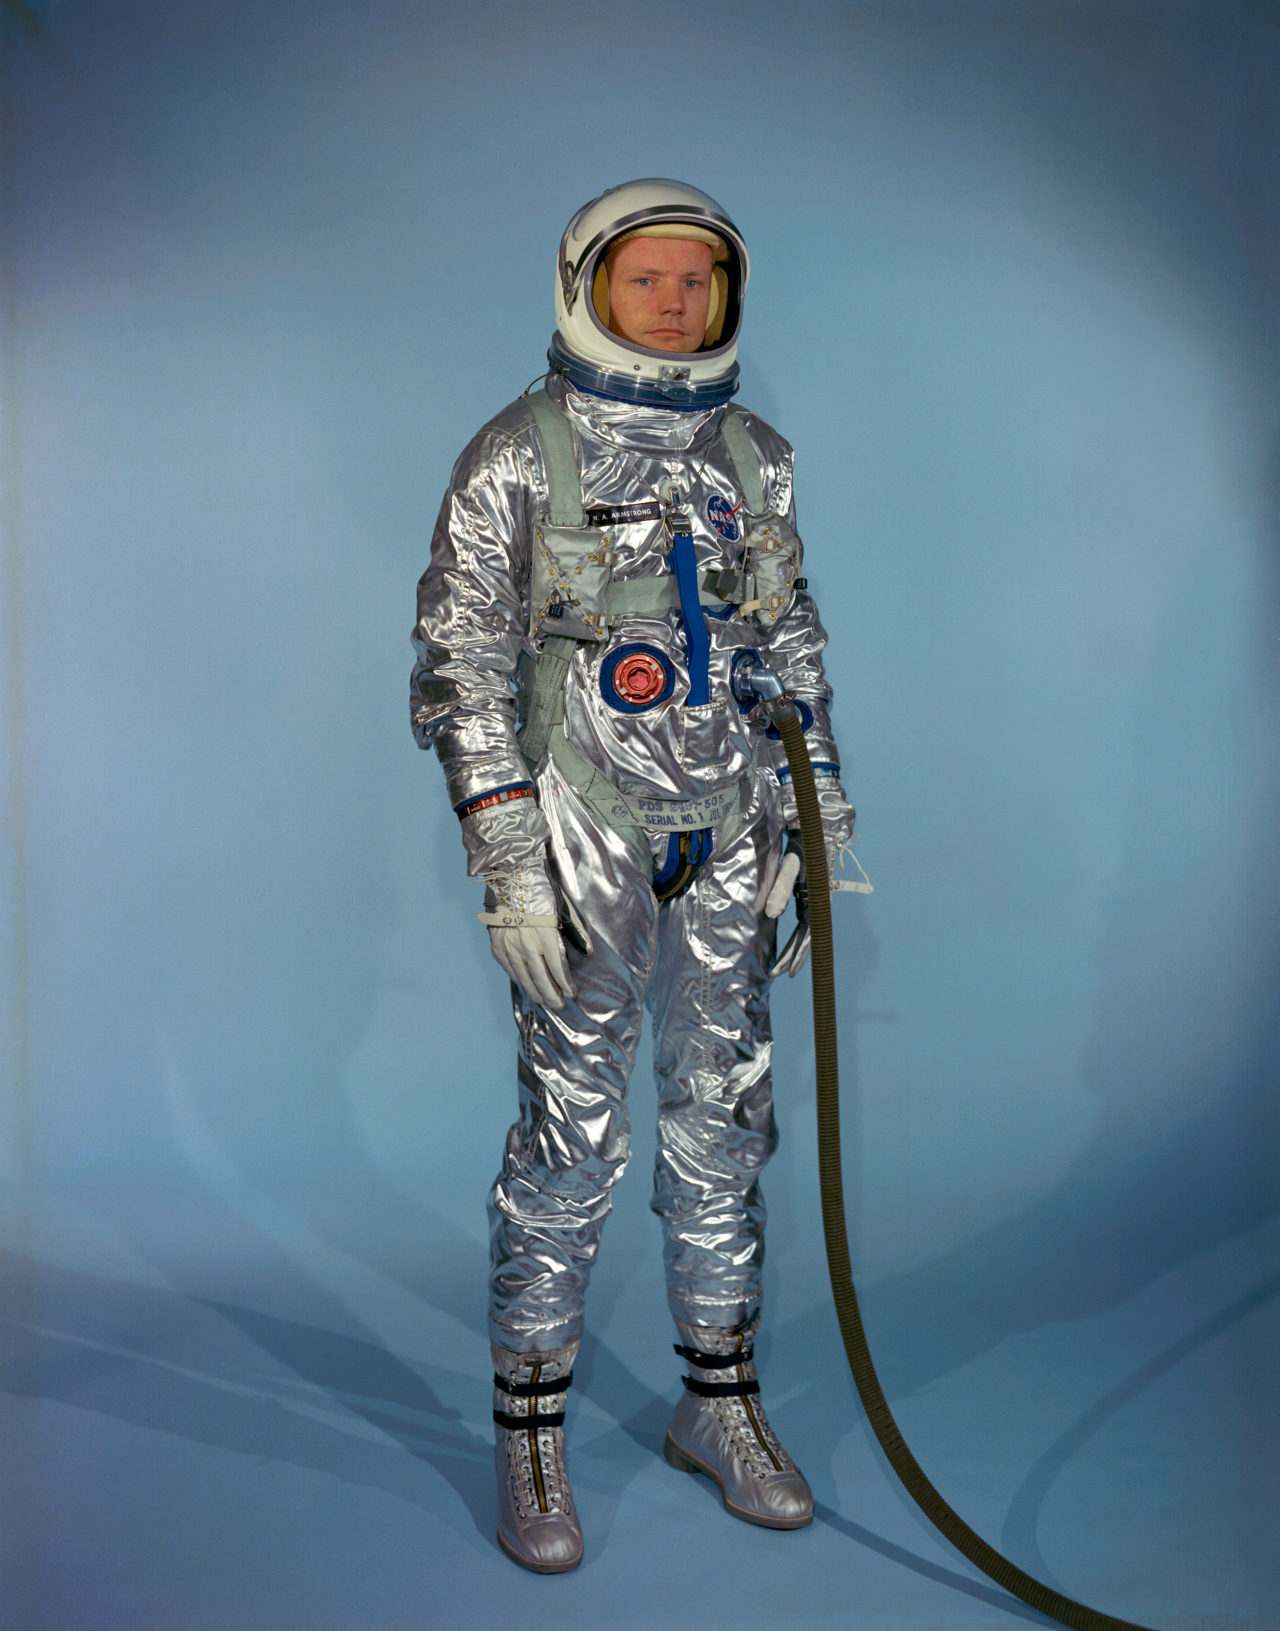 Another Monday on the Moon: in 3, 2, 1…
(R. Kelly - Ignition. Erol Sabadosh Remix.
Above, Neil Armstrong in a Gemini G-2C training suit, 1964).